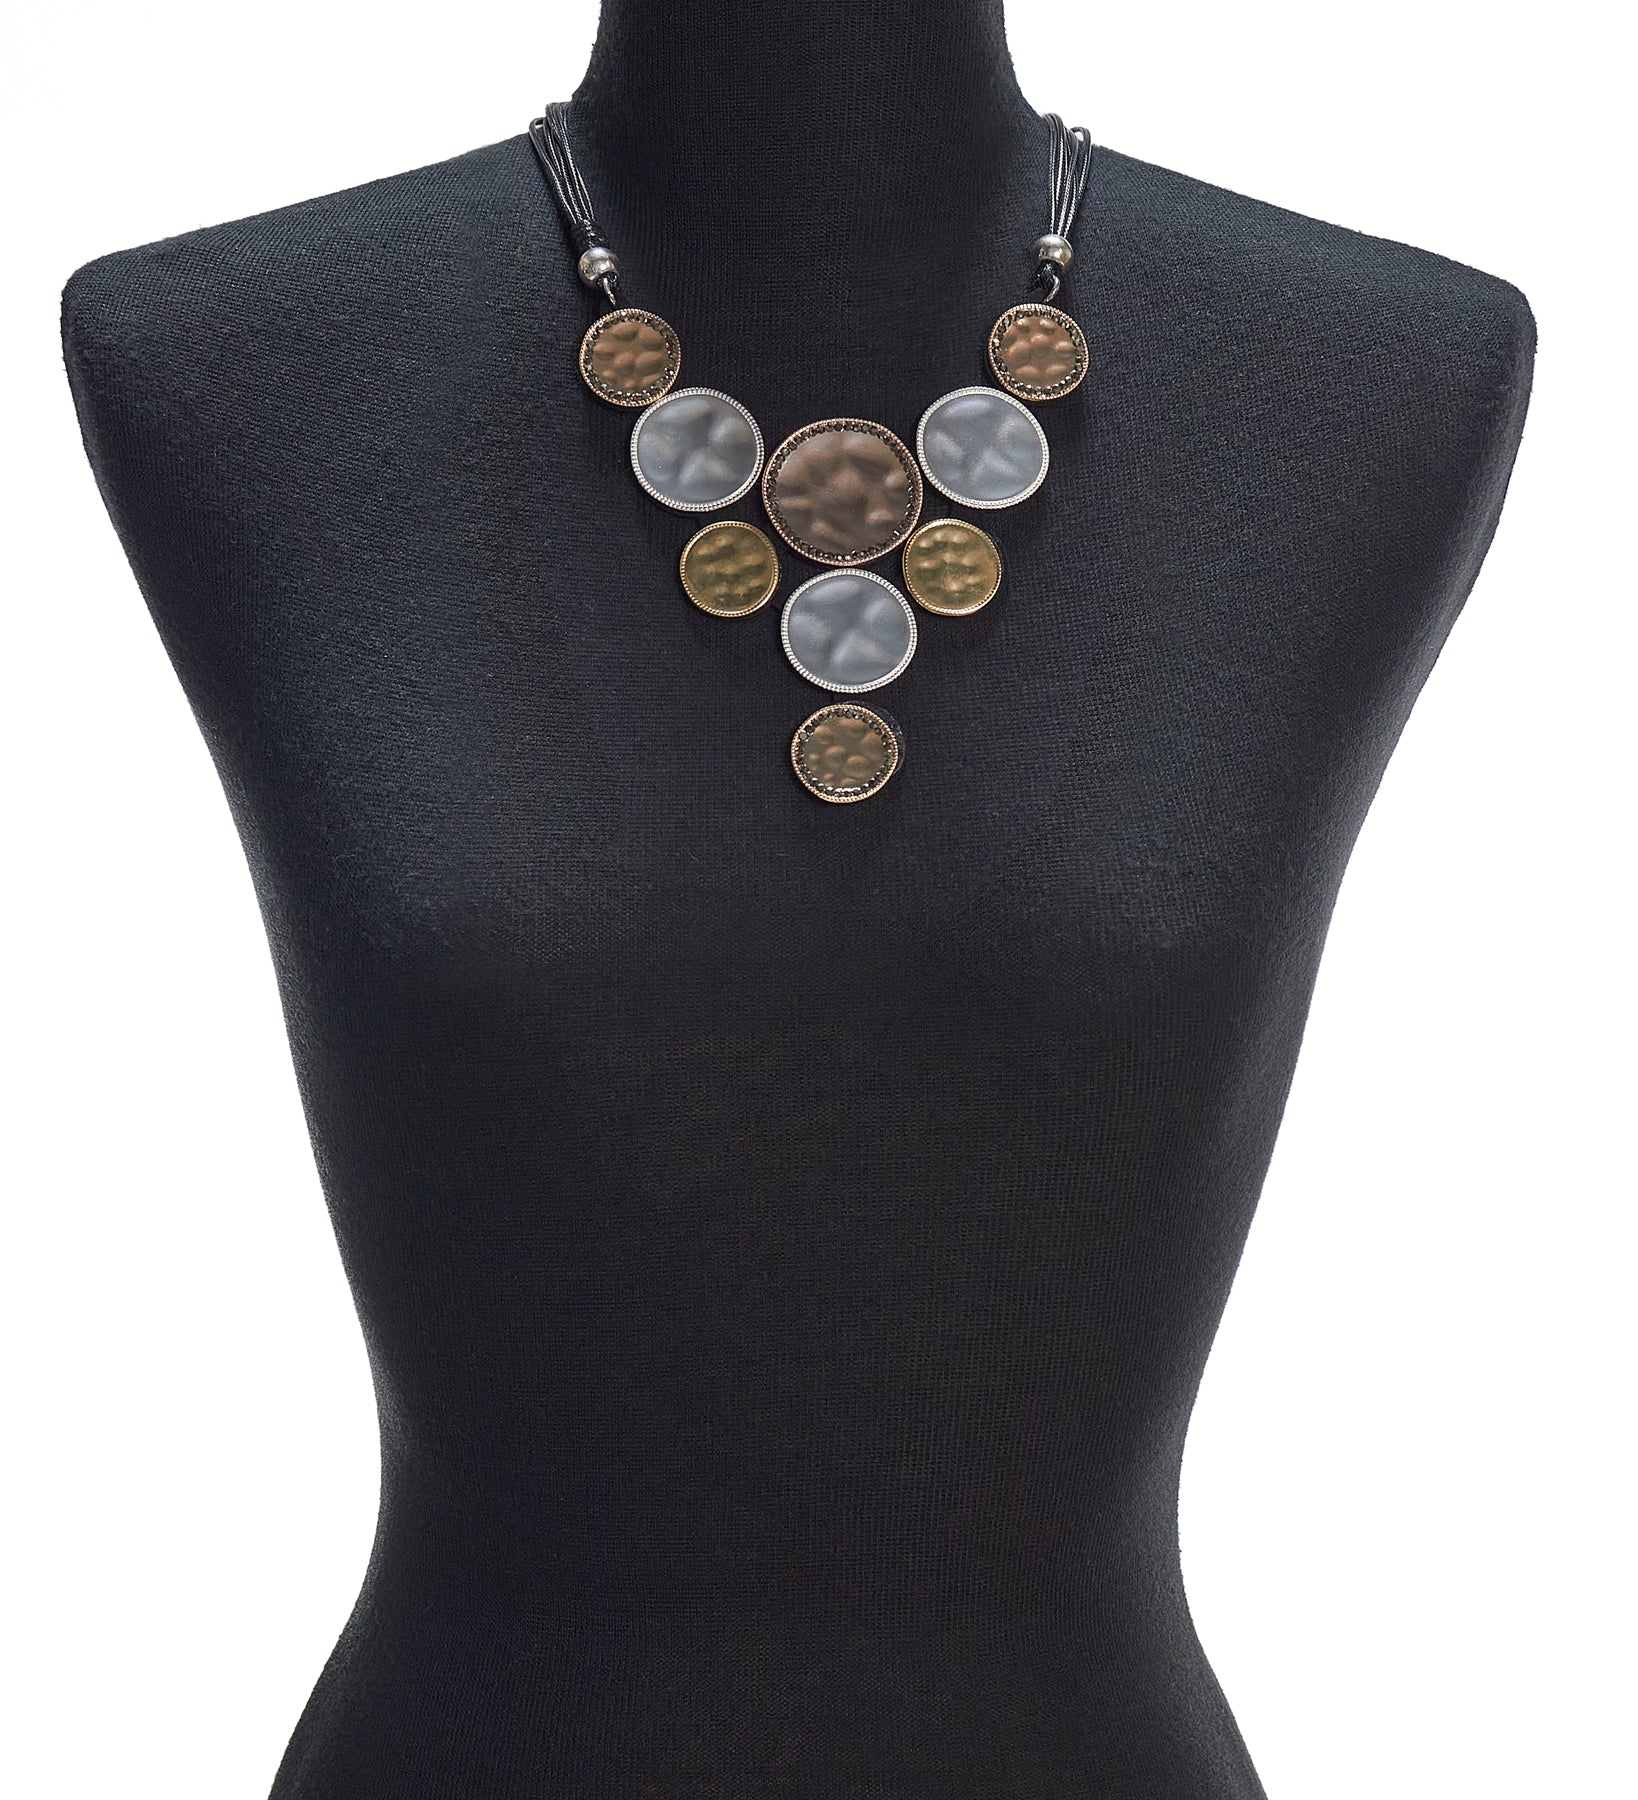 Les Nana Gold Necklace-Les Nana Accessories Montreal-Women's Costume Jewelry Online Canada